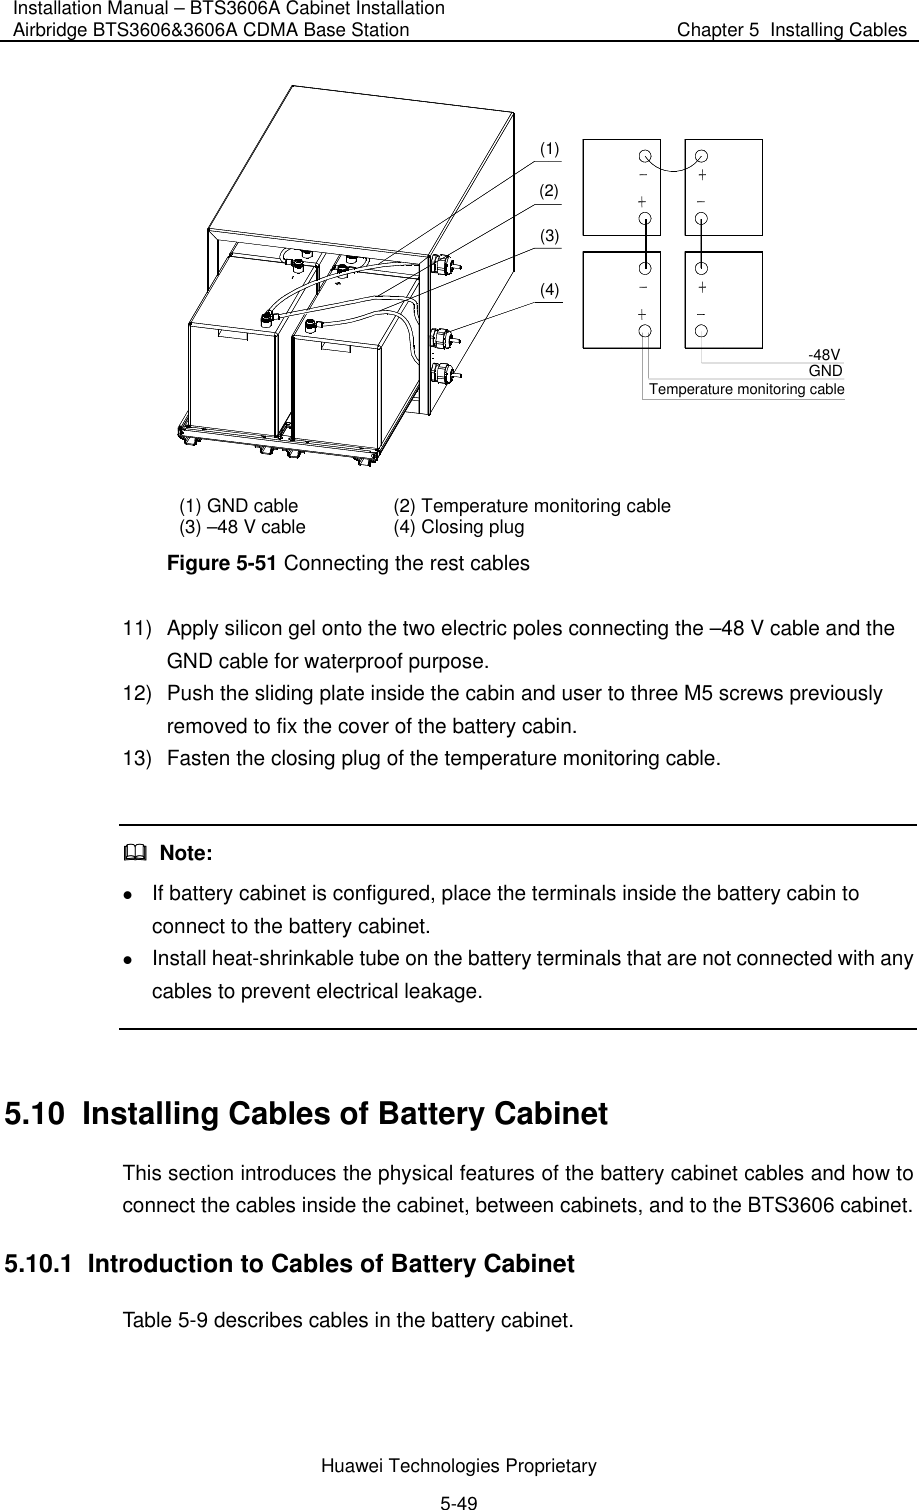 Installation Manual – BTS3606A Cabinet Installation Airbridge BTS3606&amp;3606A CDMA Base Station  Chapter 5  Installing Cables  Huawei Technologies Proprietary 5-49 (1)(2)(3)(4)-48VGNDTemperature monitoring cable (1) GND cable  (2) Temperature monitoring cable (3) –48 V cable  (4) Closing plug Figure 5-51 Connecting the rest cables 11)  Apply silicon gel onto the two electric poles connecting the –48 V cable and the GND cable for waterproof purpose. 12)  Push the sliding plate inside the cabin and user to three M5 screws previously removed to fix the cover of the battery cabin. 13)  Fasten the closing plug of the temperature monitoring cable.    Note: z If battery cabinet is configured, place the terminals inside the battery cabin to connect to the battery cabinet.  z Install heat-shrinkable tube on the battery terminals that are not connected with any cables to prevent electrical leakage.  5.10  Installing Cables of Battery Cabinet This section introduces the physical features of the battery cabinet cables and how to connect the cables inside the cabinet, between cabinets, and to the BTS3606 cabinet. 5.10.1  Introduction to Cables of Battery Cabinet Table 5-9 describes cables in the battery cabinet. 